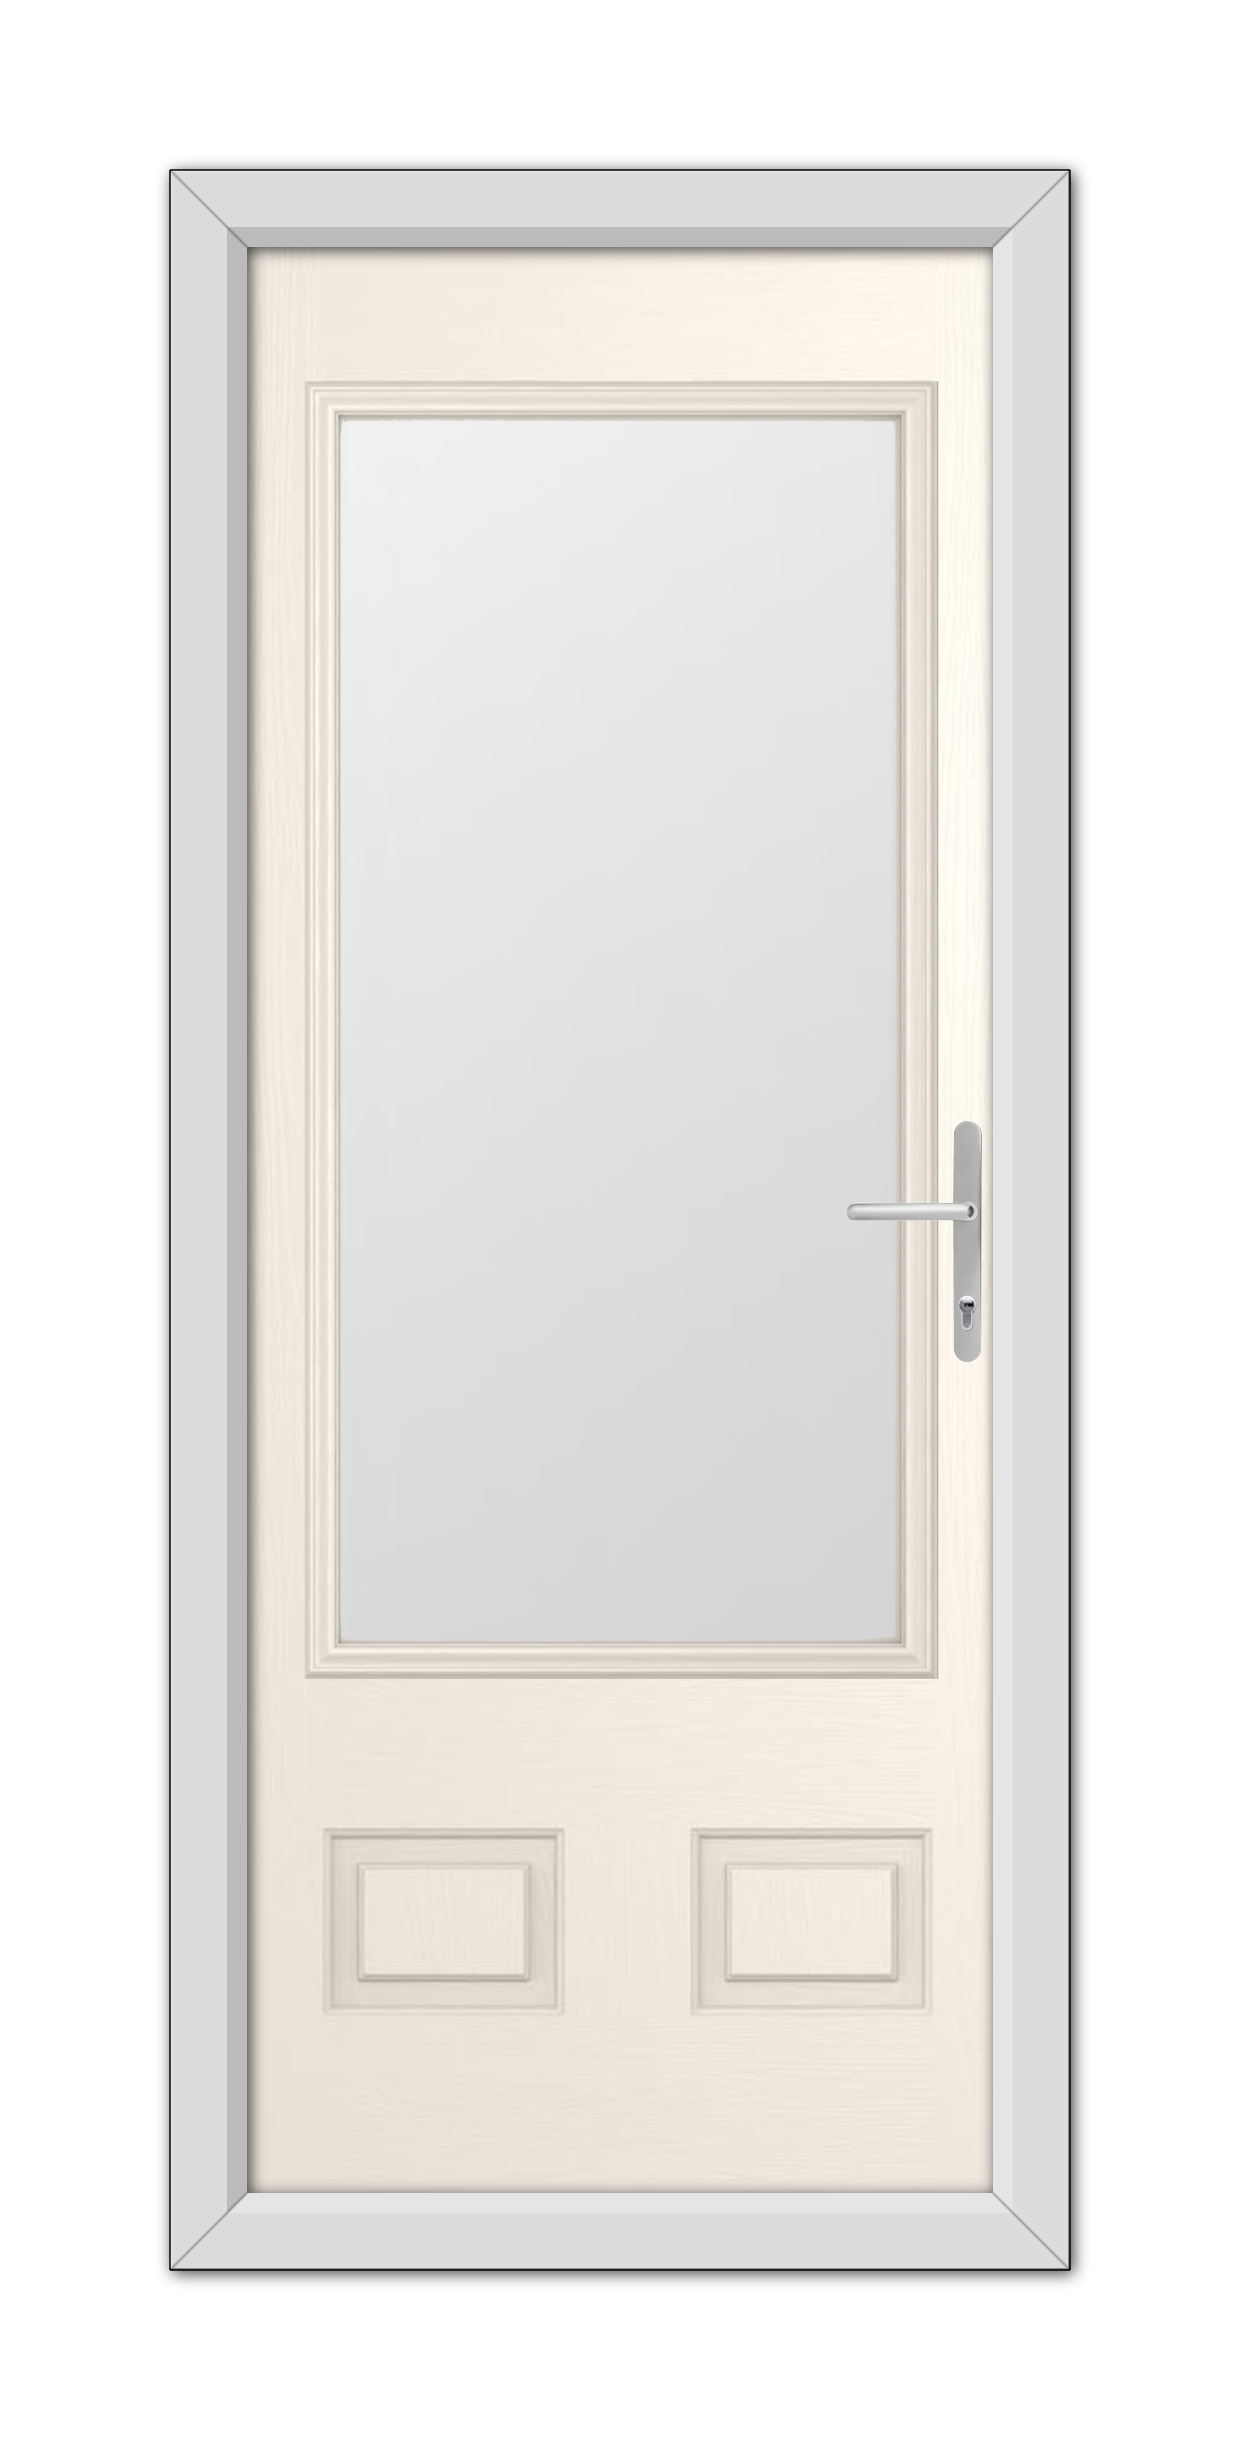 A modern White Foil Walcot Composite Door with a rectangular frosted glass panel and a silver handle, framed by a simple gray casing.